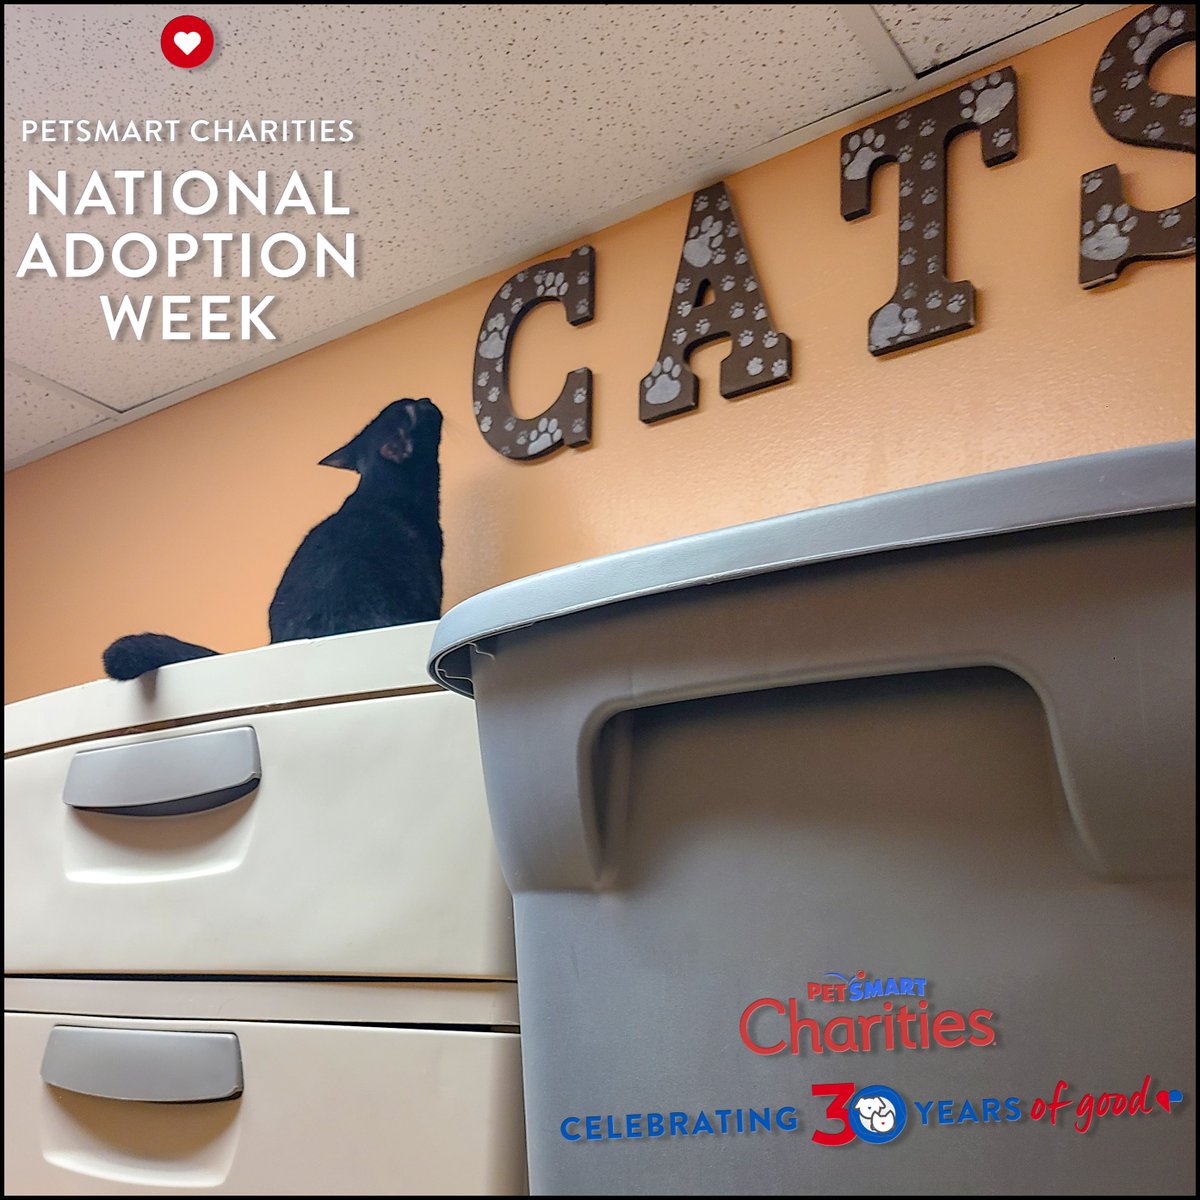 I’m checking to be sure everything is in order for our adoption event this Caturday. 
It's a tough job!  Someone will be happy to have such a stunning mini-panther in their life! -Assassin.
#pantherthursday #blackcatsrule #adoptlove #nationaladoptionweek #petsmartcharities